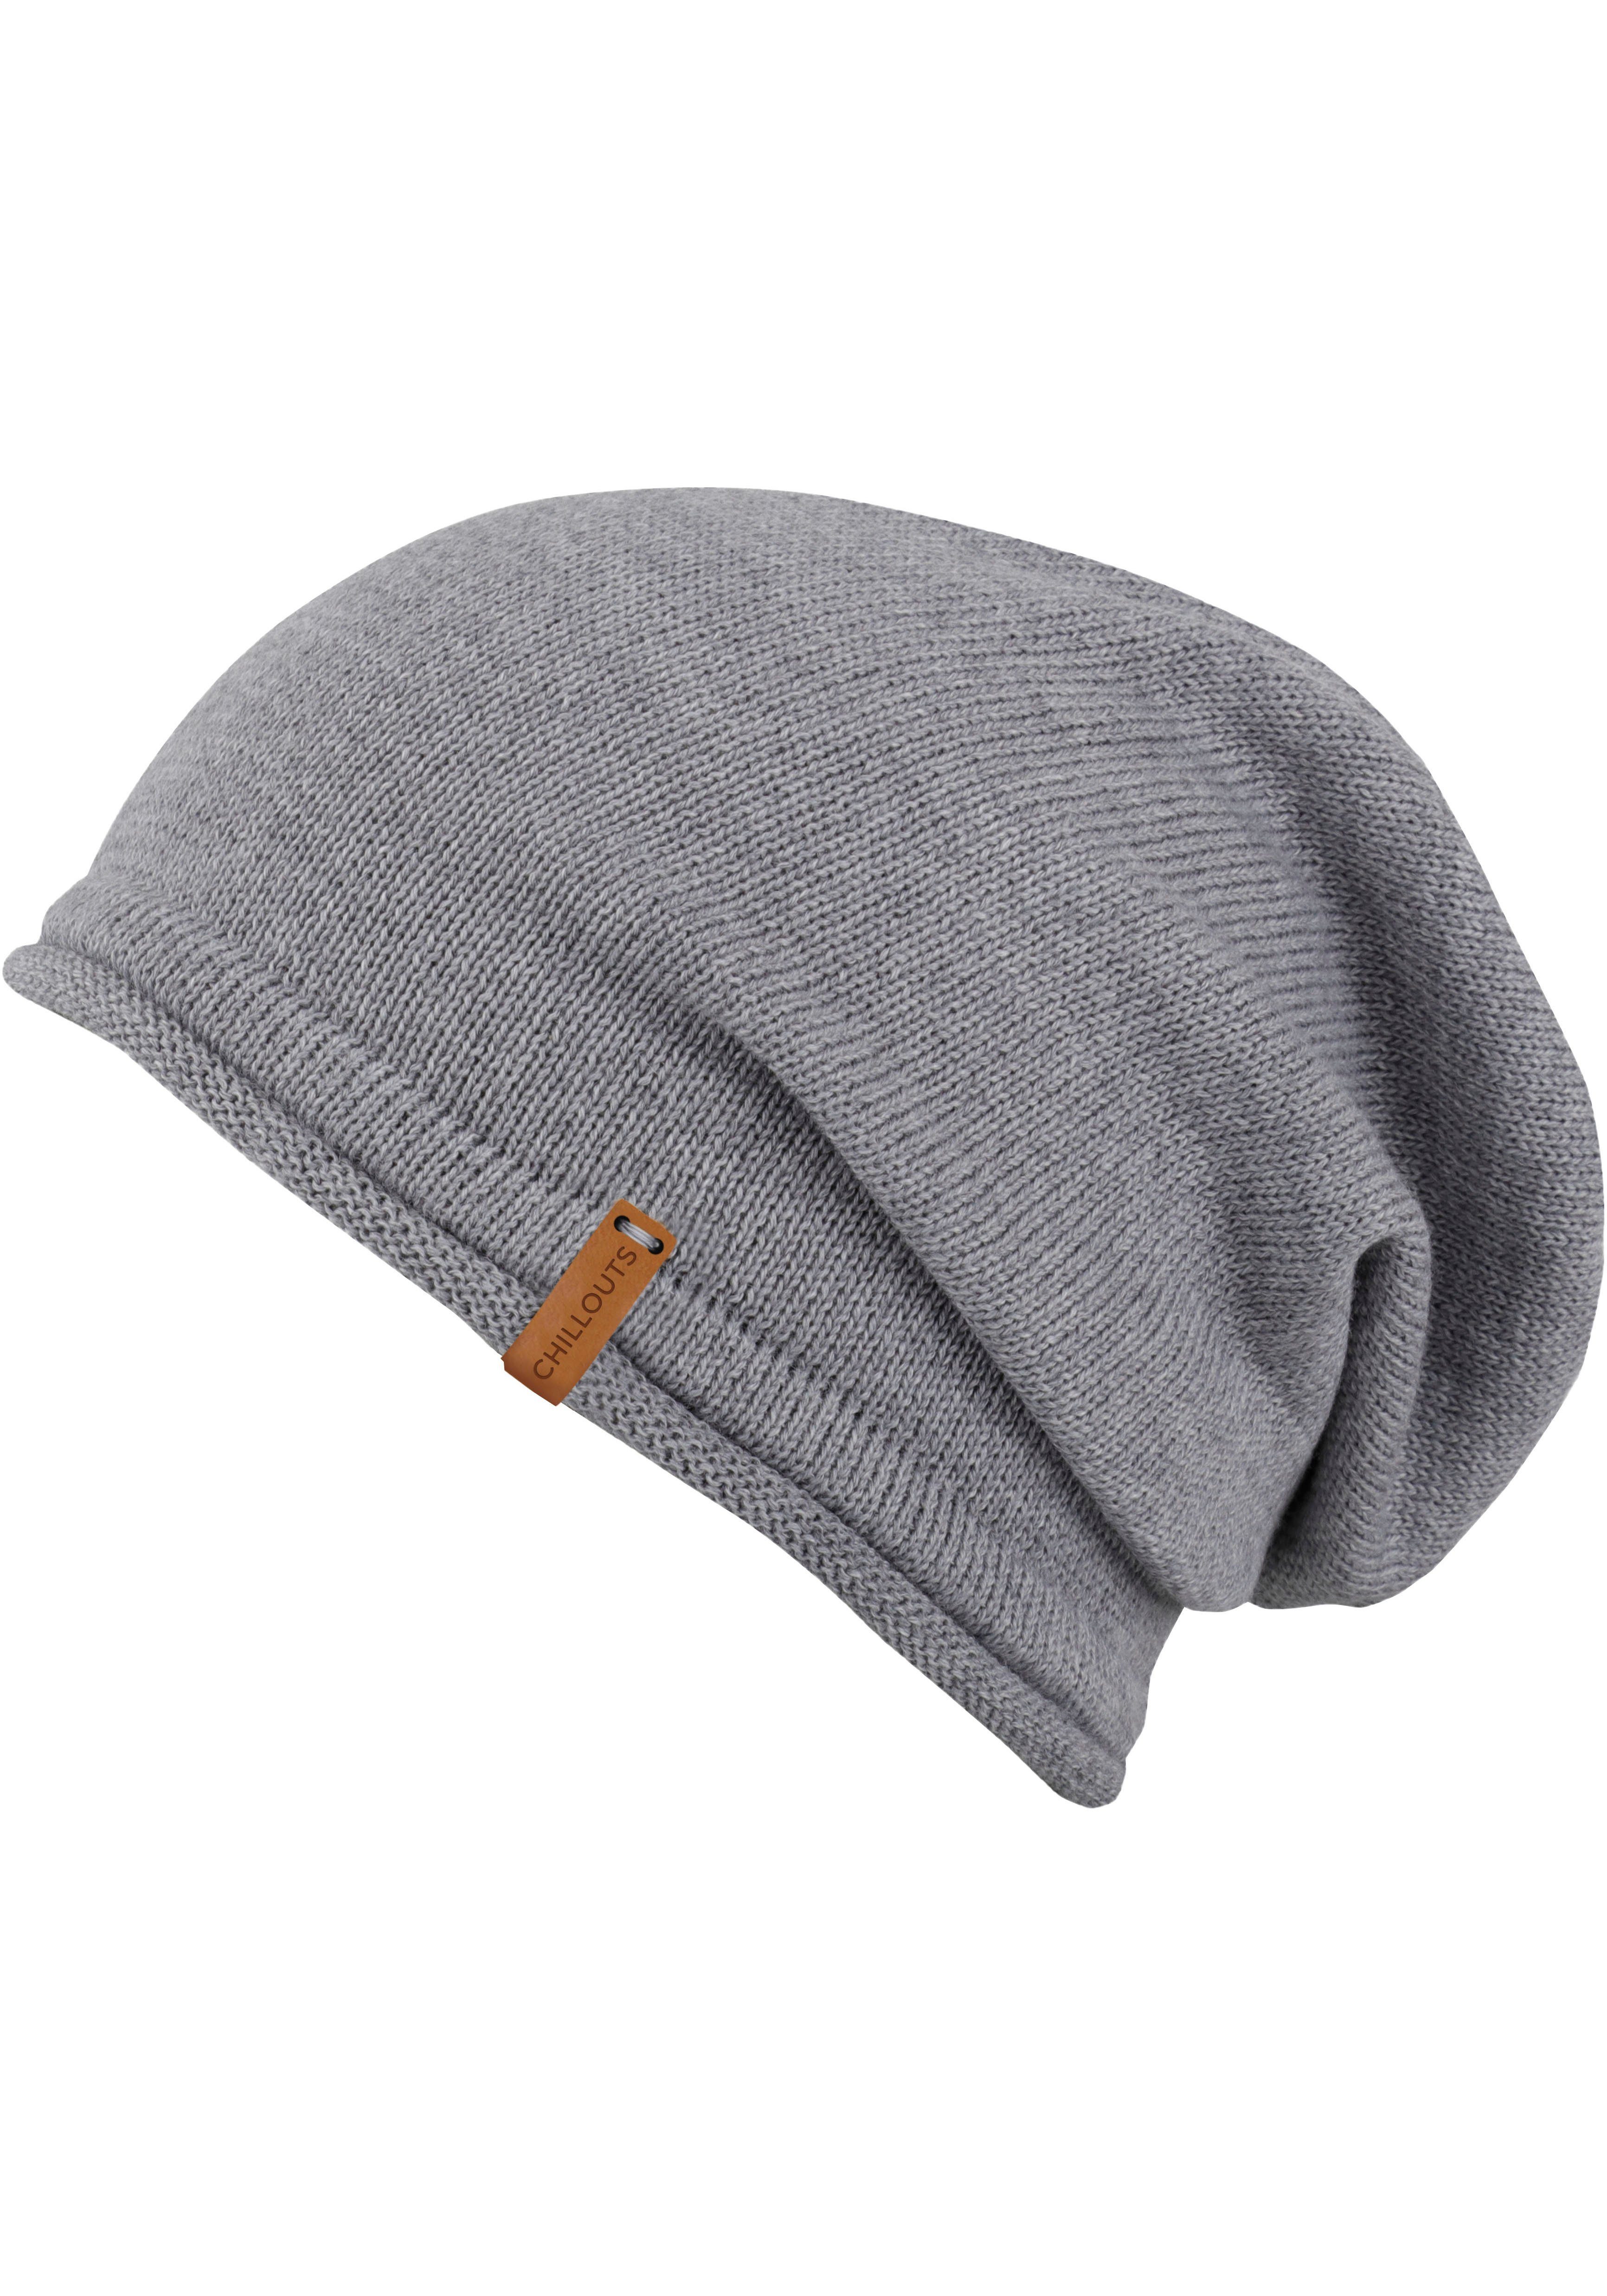 | online kaufen Beanies OTTO chillouts